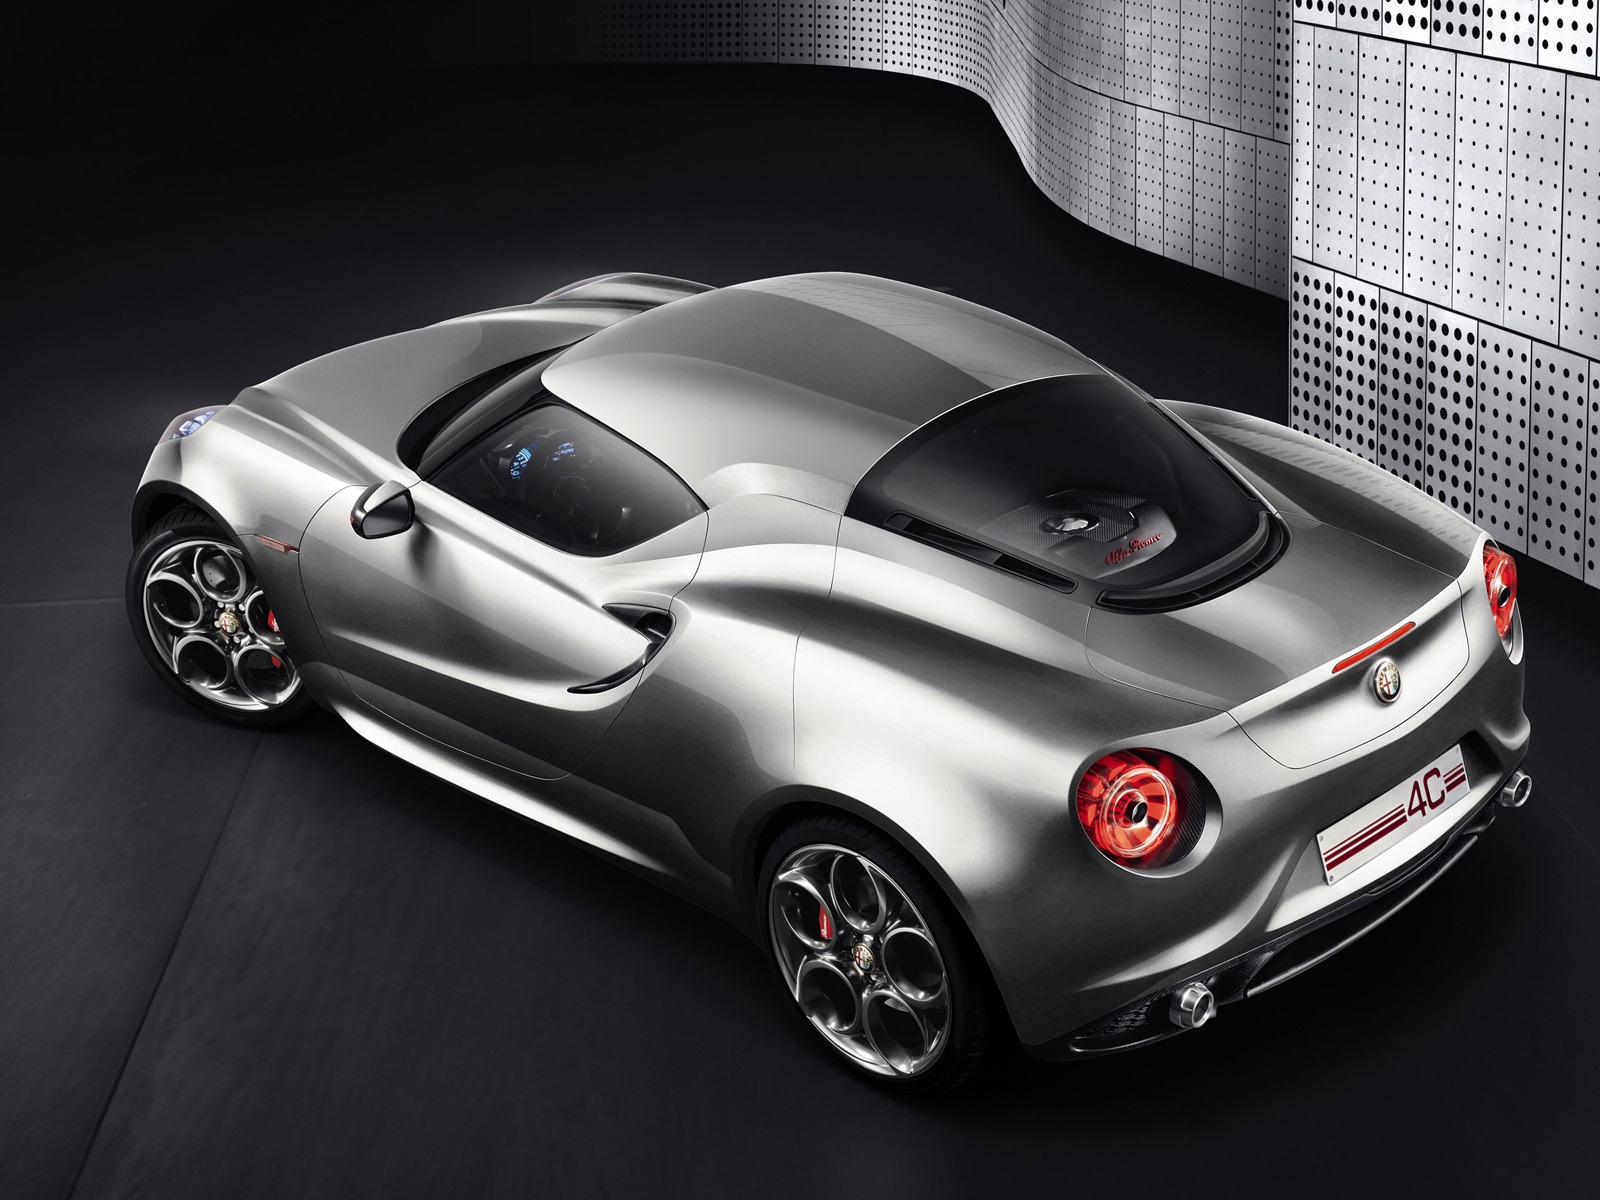 Alfa 4c Concept Rear Top View for 1600 x 1200 resolution